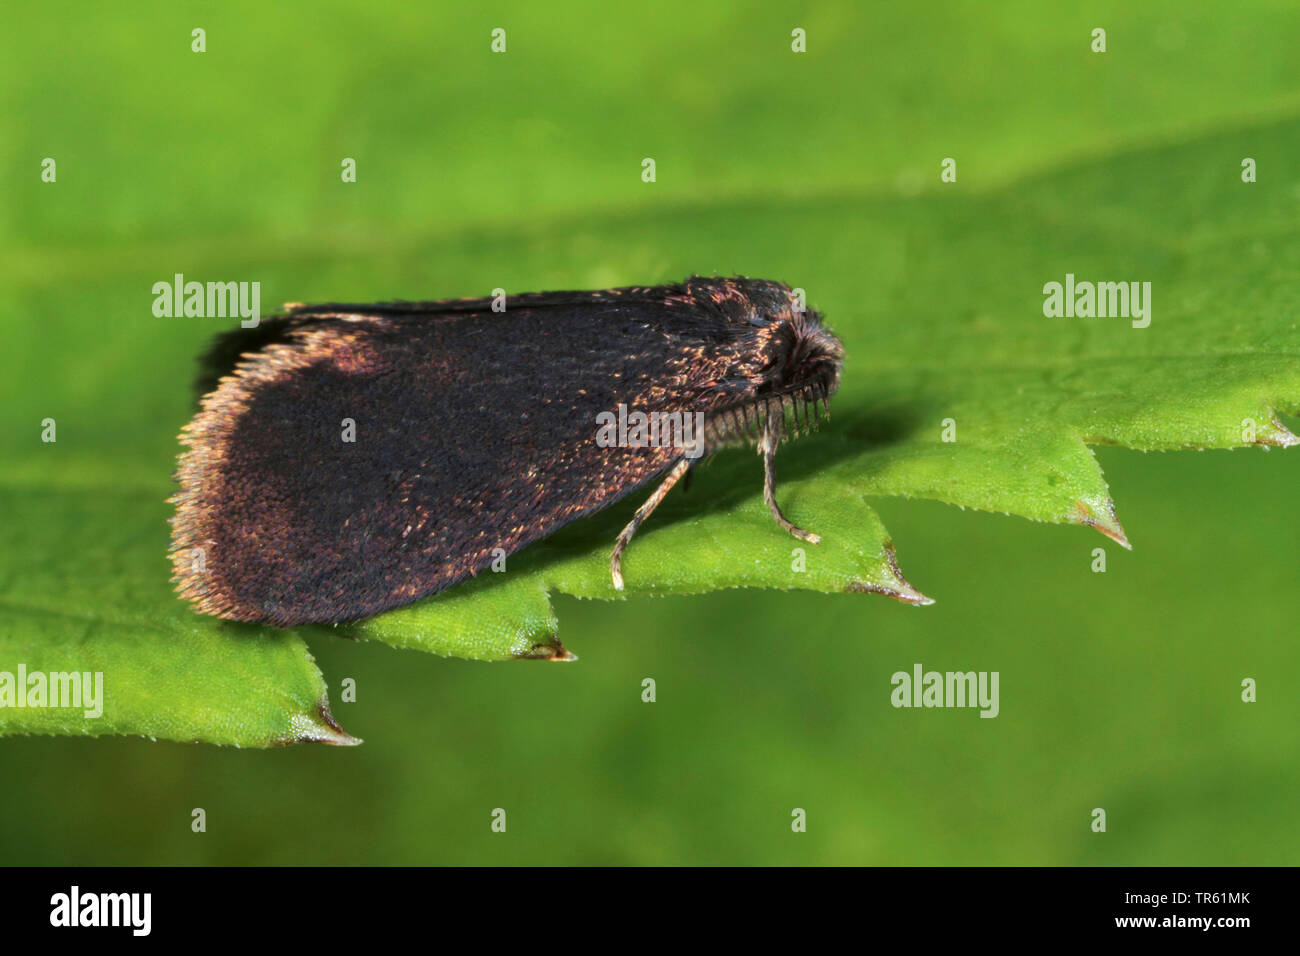 Common bagworm (Psyche casta), sitting on a leaf, Germany Stock Photo